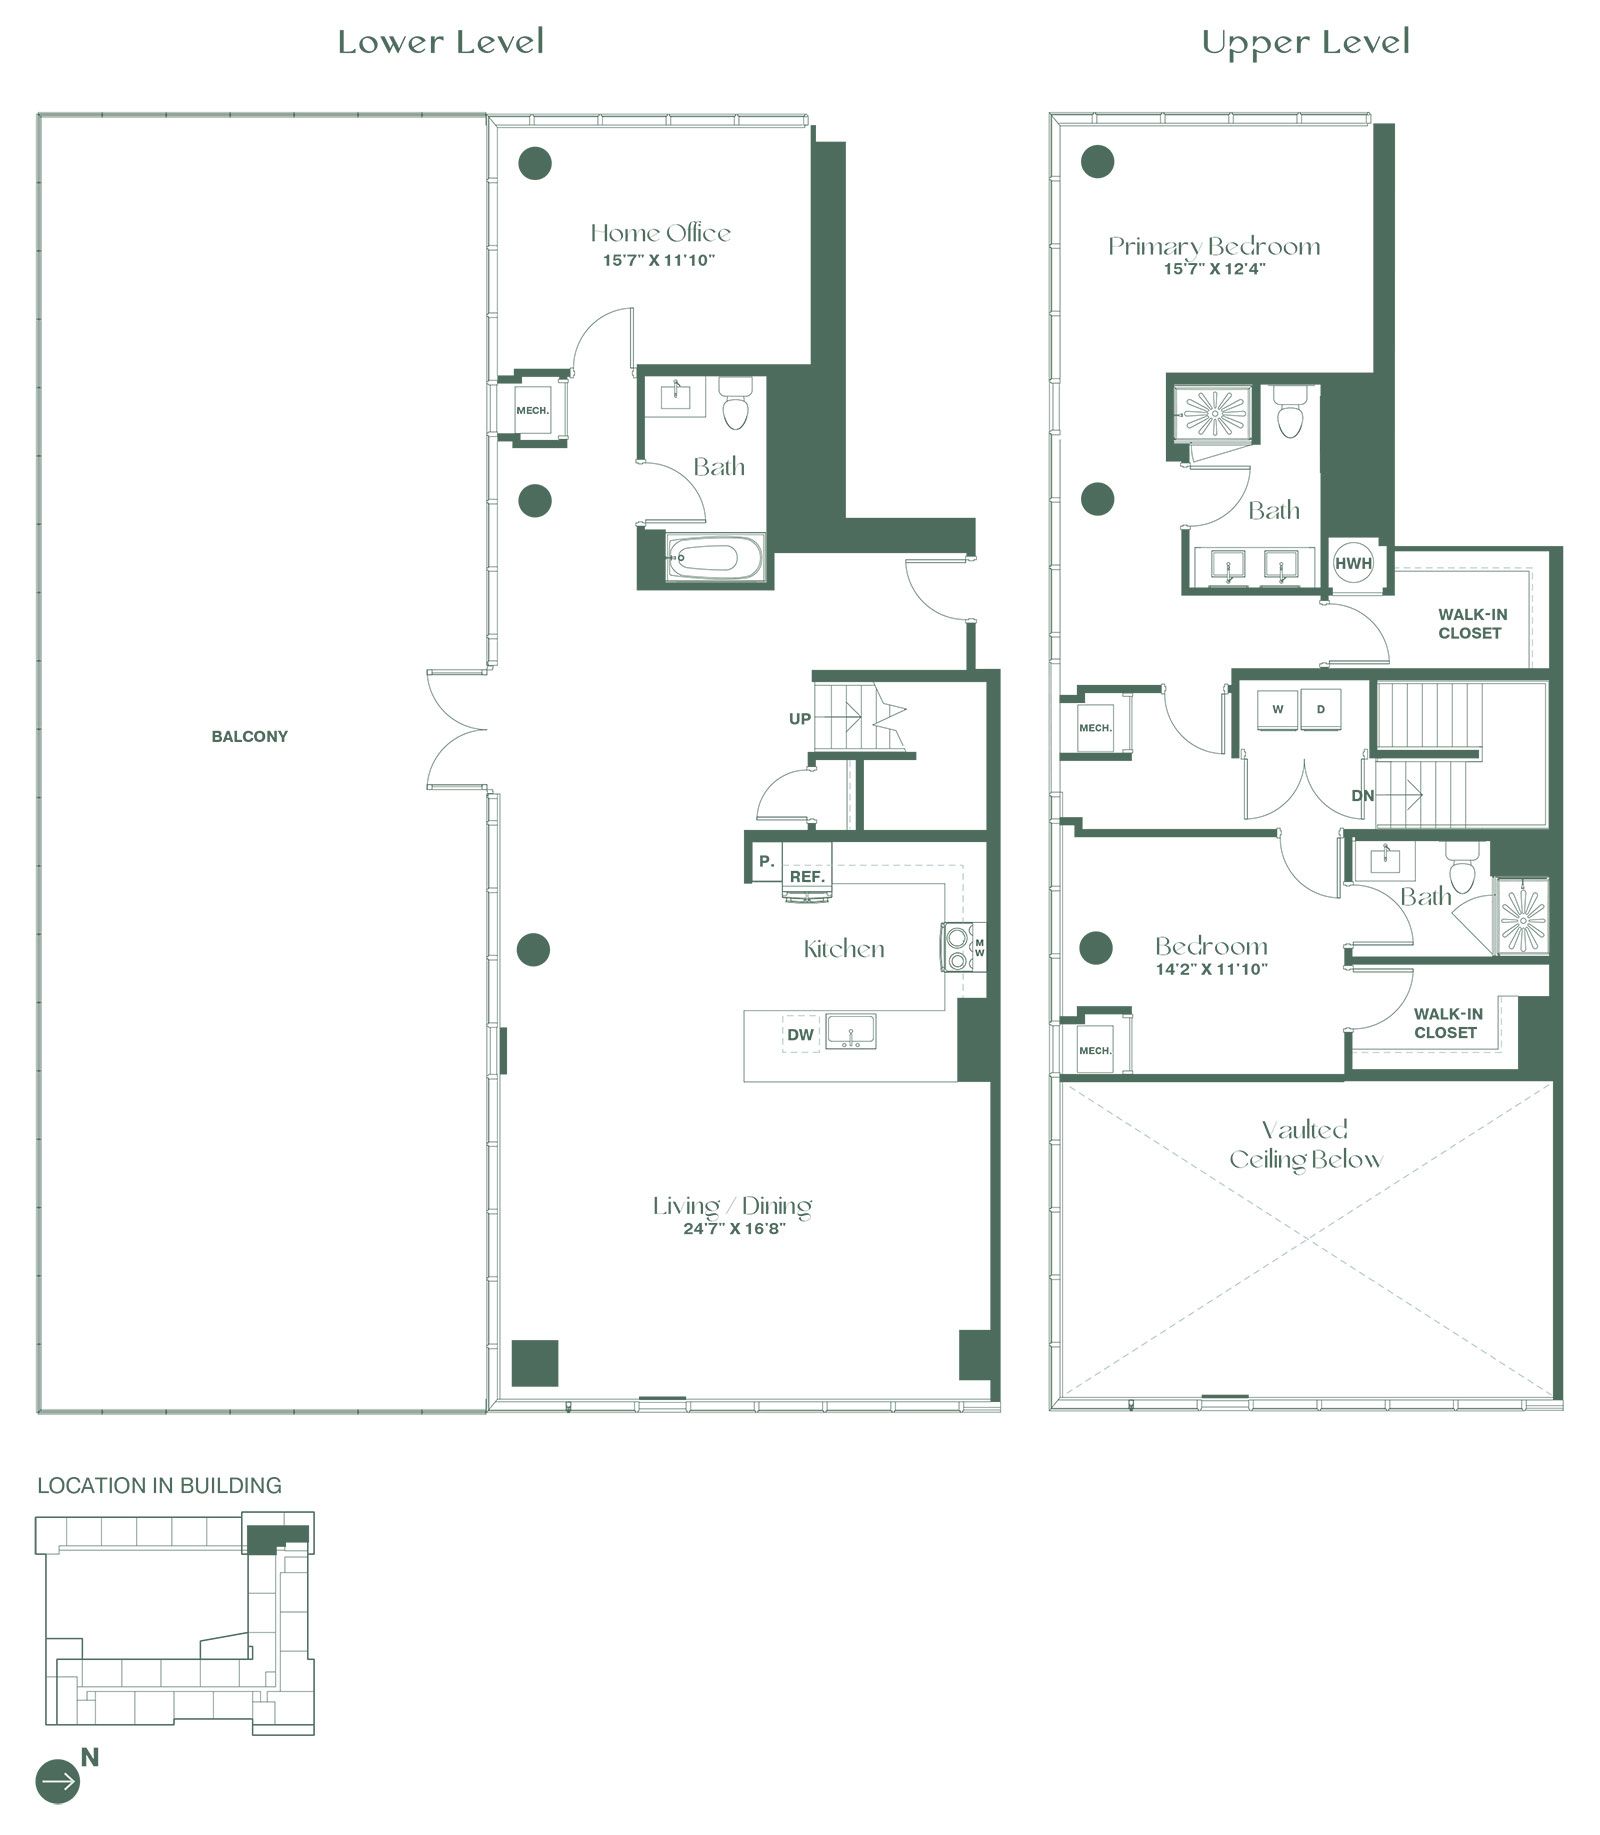 Floorplan for a two-bedroom, three-bath apartment with den at RVR at Xchange opens with a balcony that runs the length of the apartment, full bath and den. The second floor features a living and dining room with a fully equipped kitchen. On the second floor you will find a bedroom with walk-in closet, and full bathroom and the primary bedroom suite with a large walk-in closet and full bathroom.